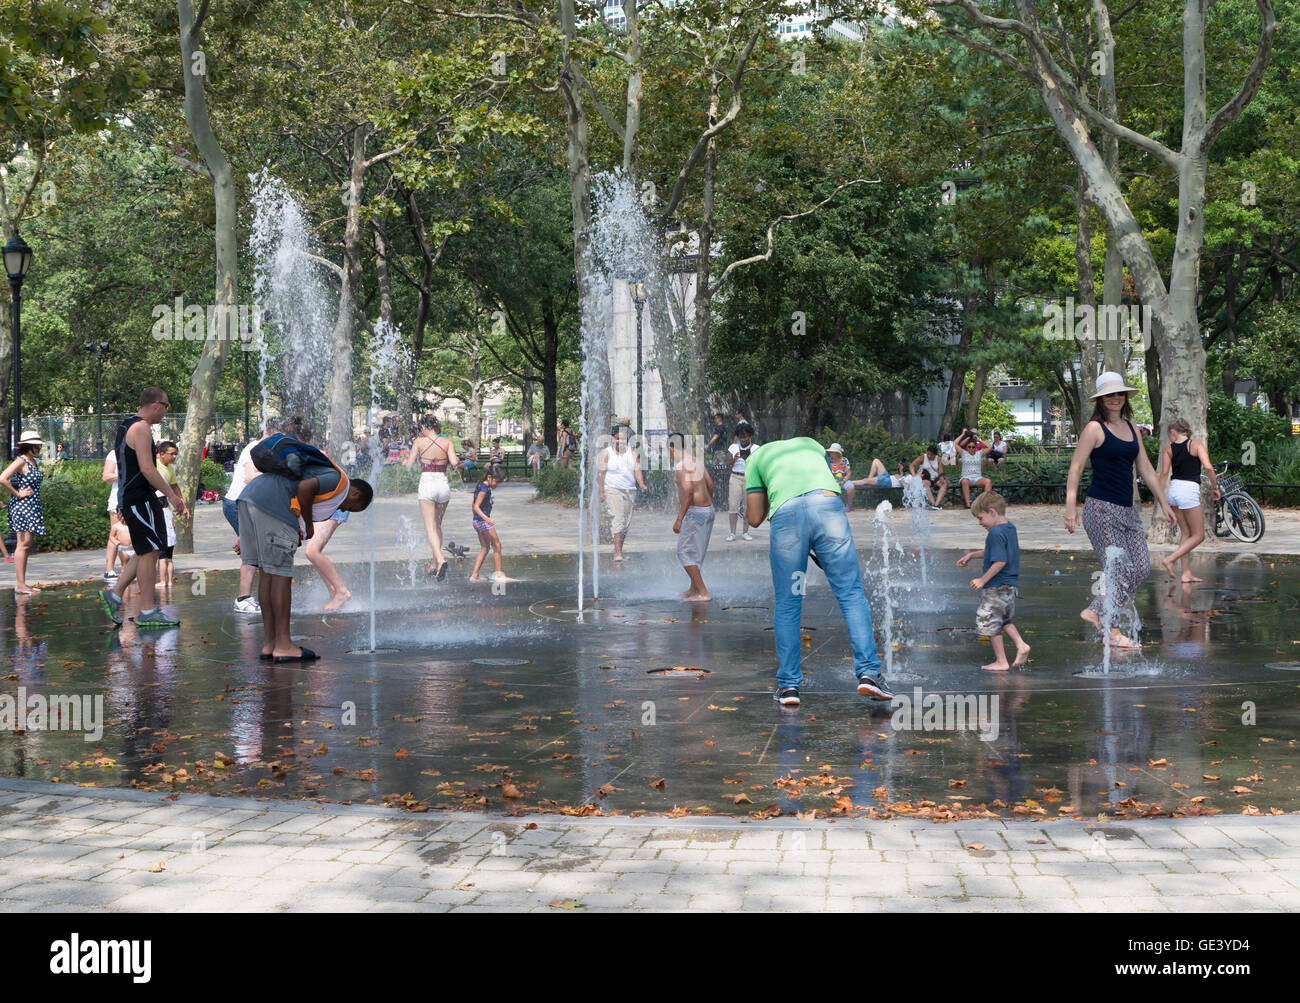 Adults and children play in water fountains in Battery Park, New York, to cool off during a heat wave. Stock Photo